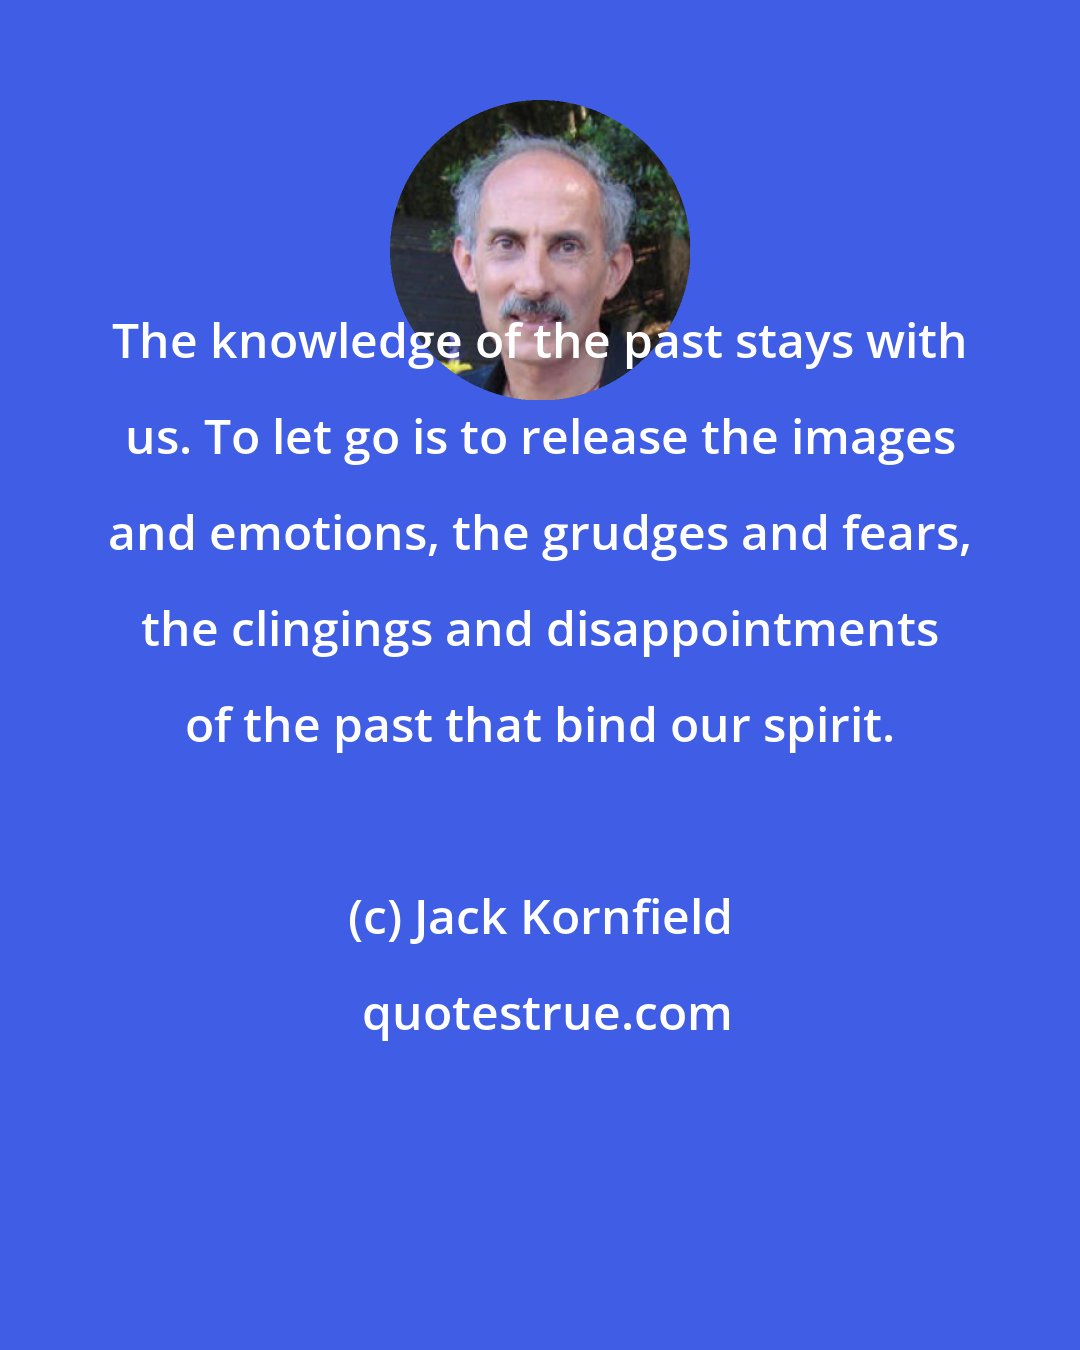 Jack Kornfield: The knowledge of the past stays with us. To let go is to release the images and emotions, the grudges and fears, the clingings and disappointments of the past that bind our spirit.